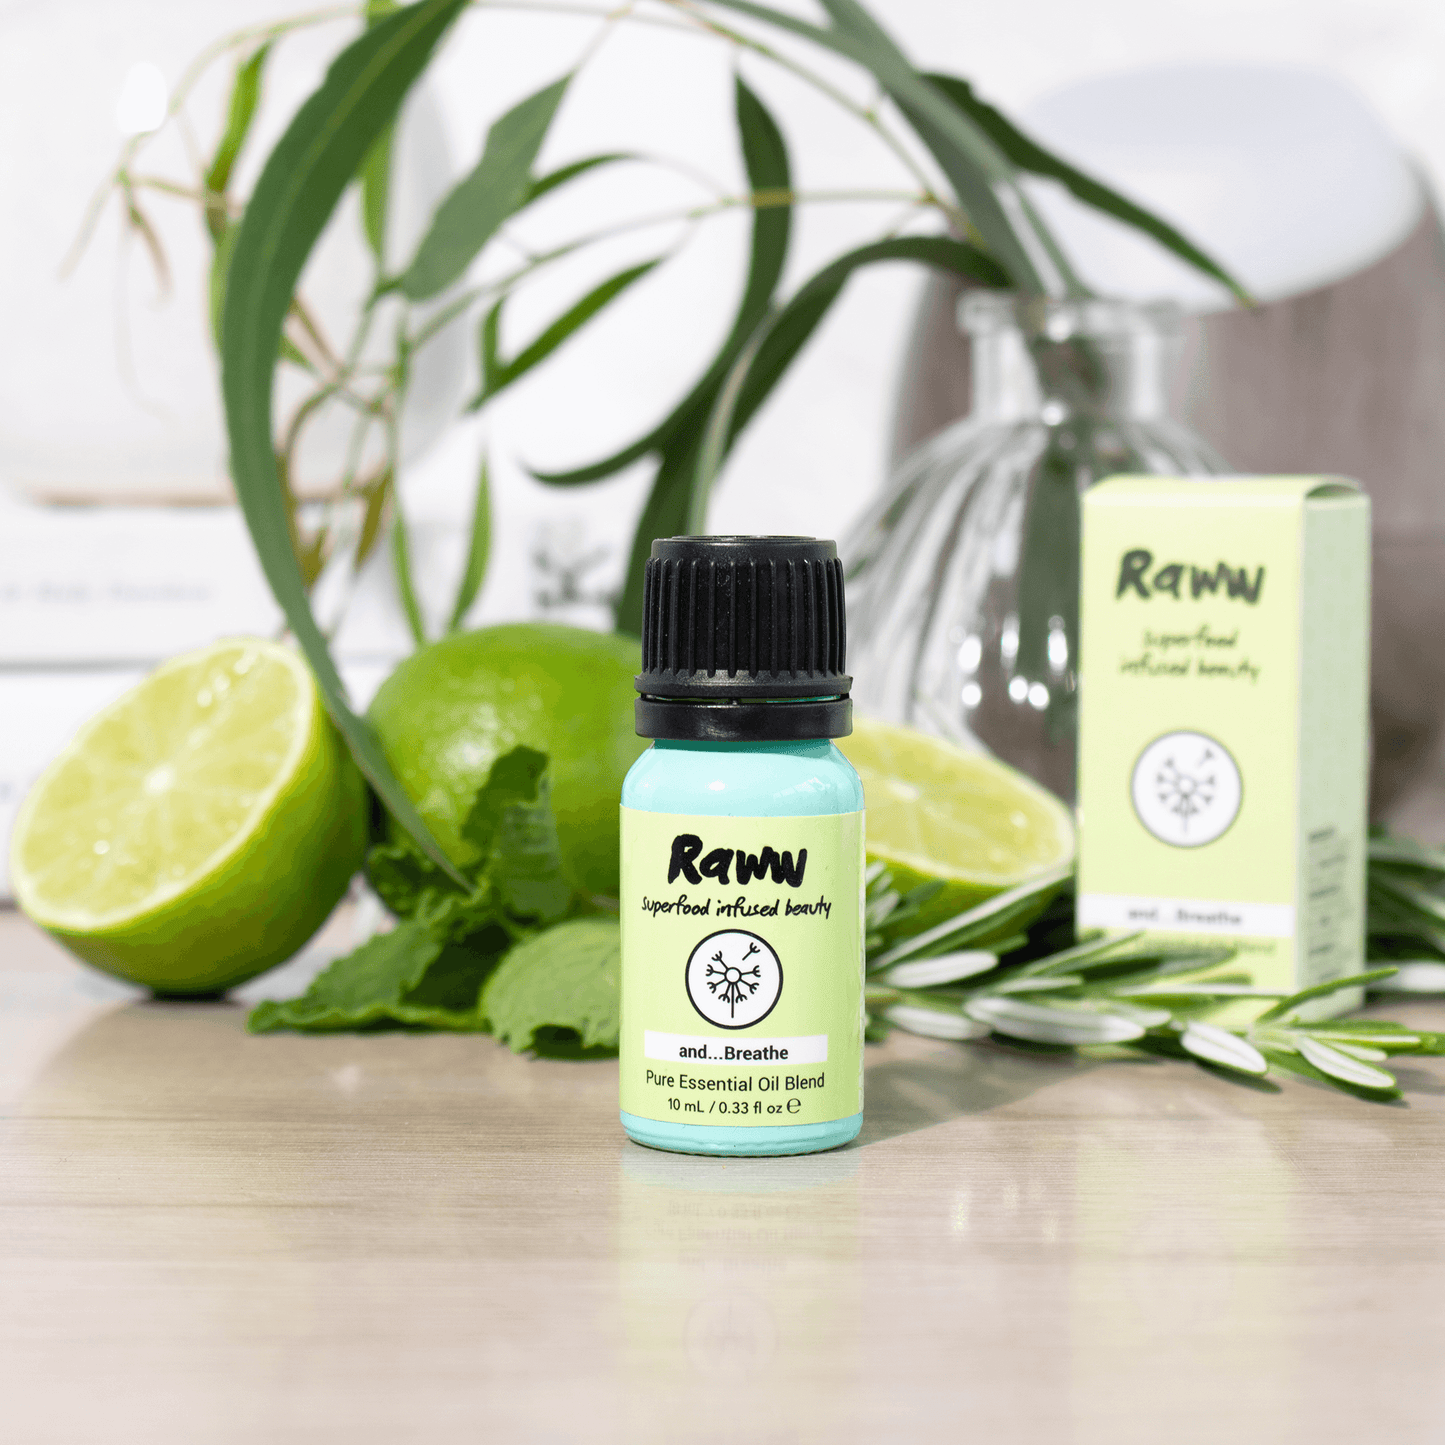 And, Breathe Essential Oil Blend | RAWW Cosmetics | Lifestyle 01